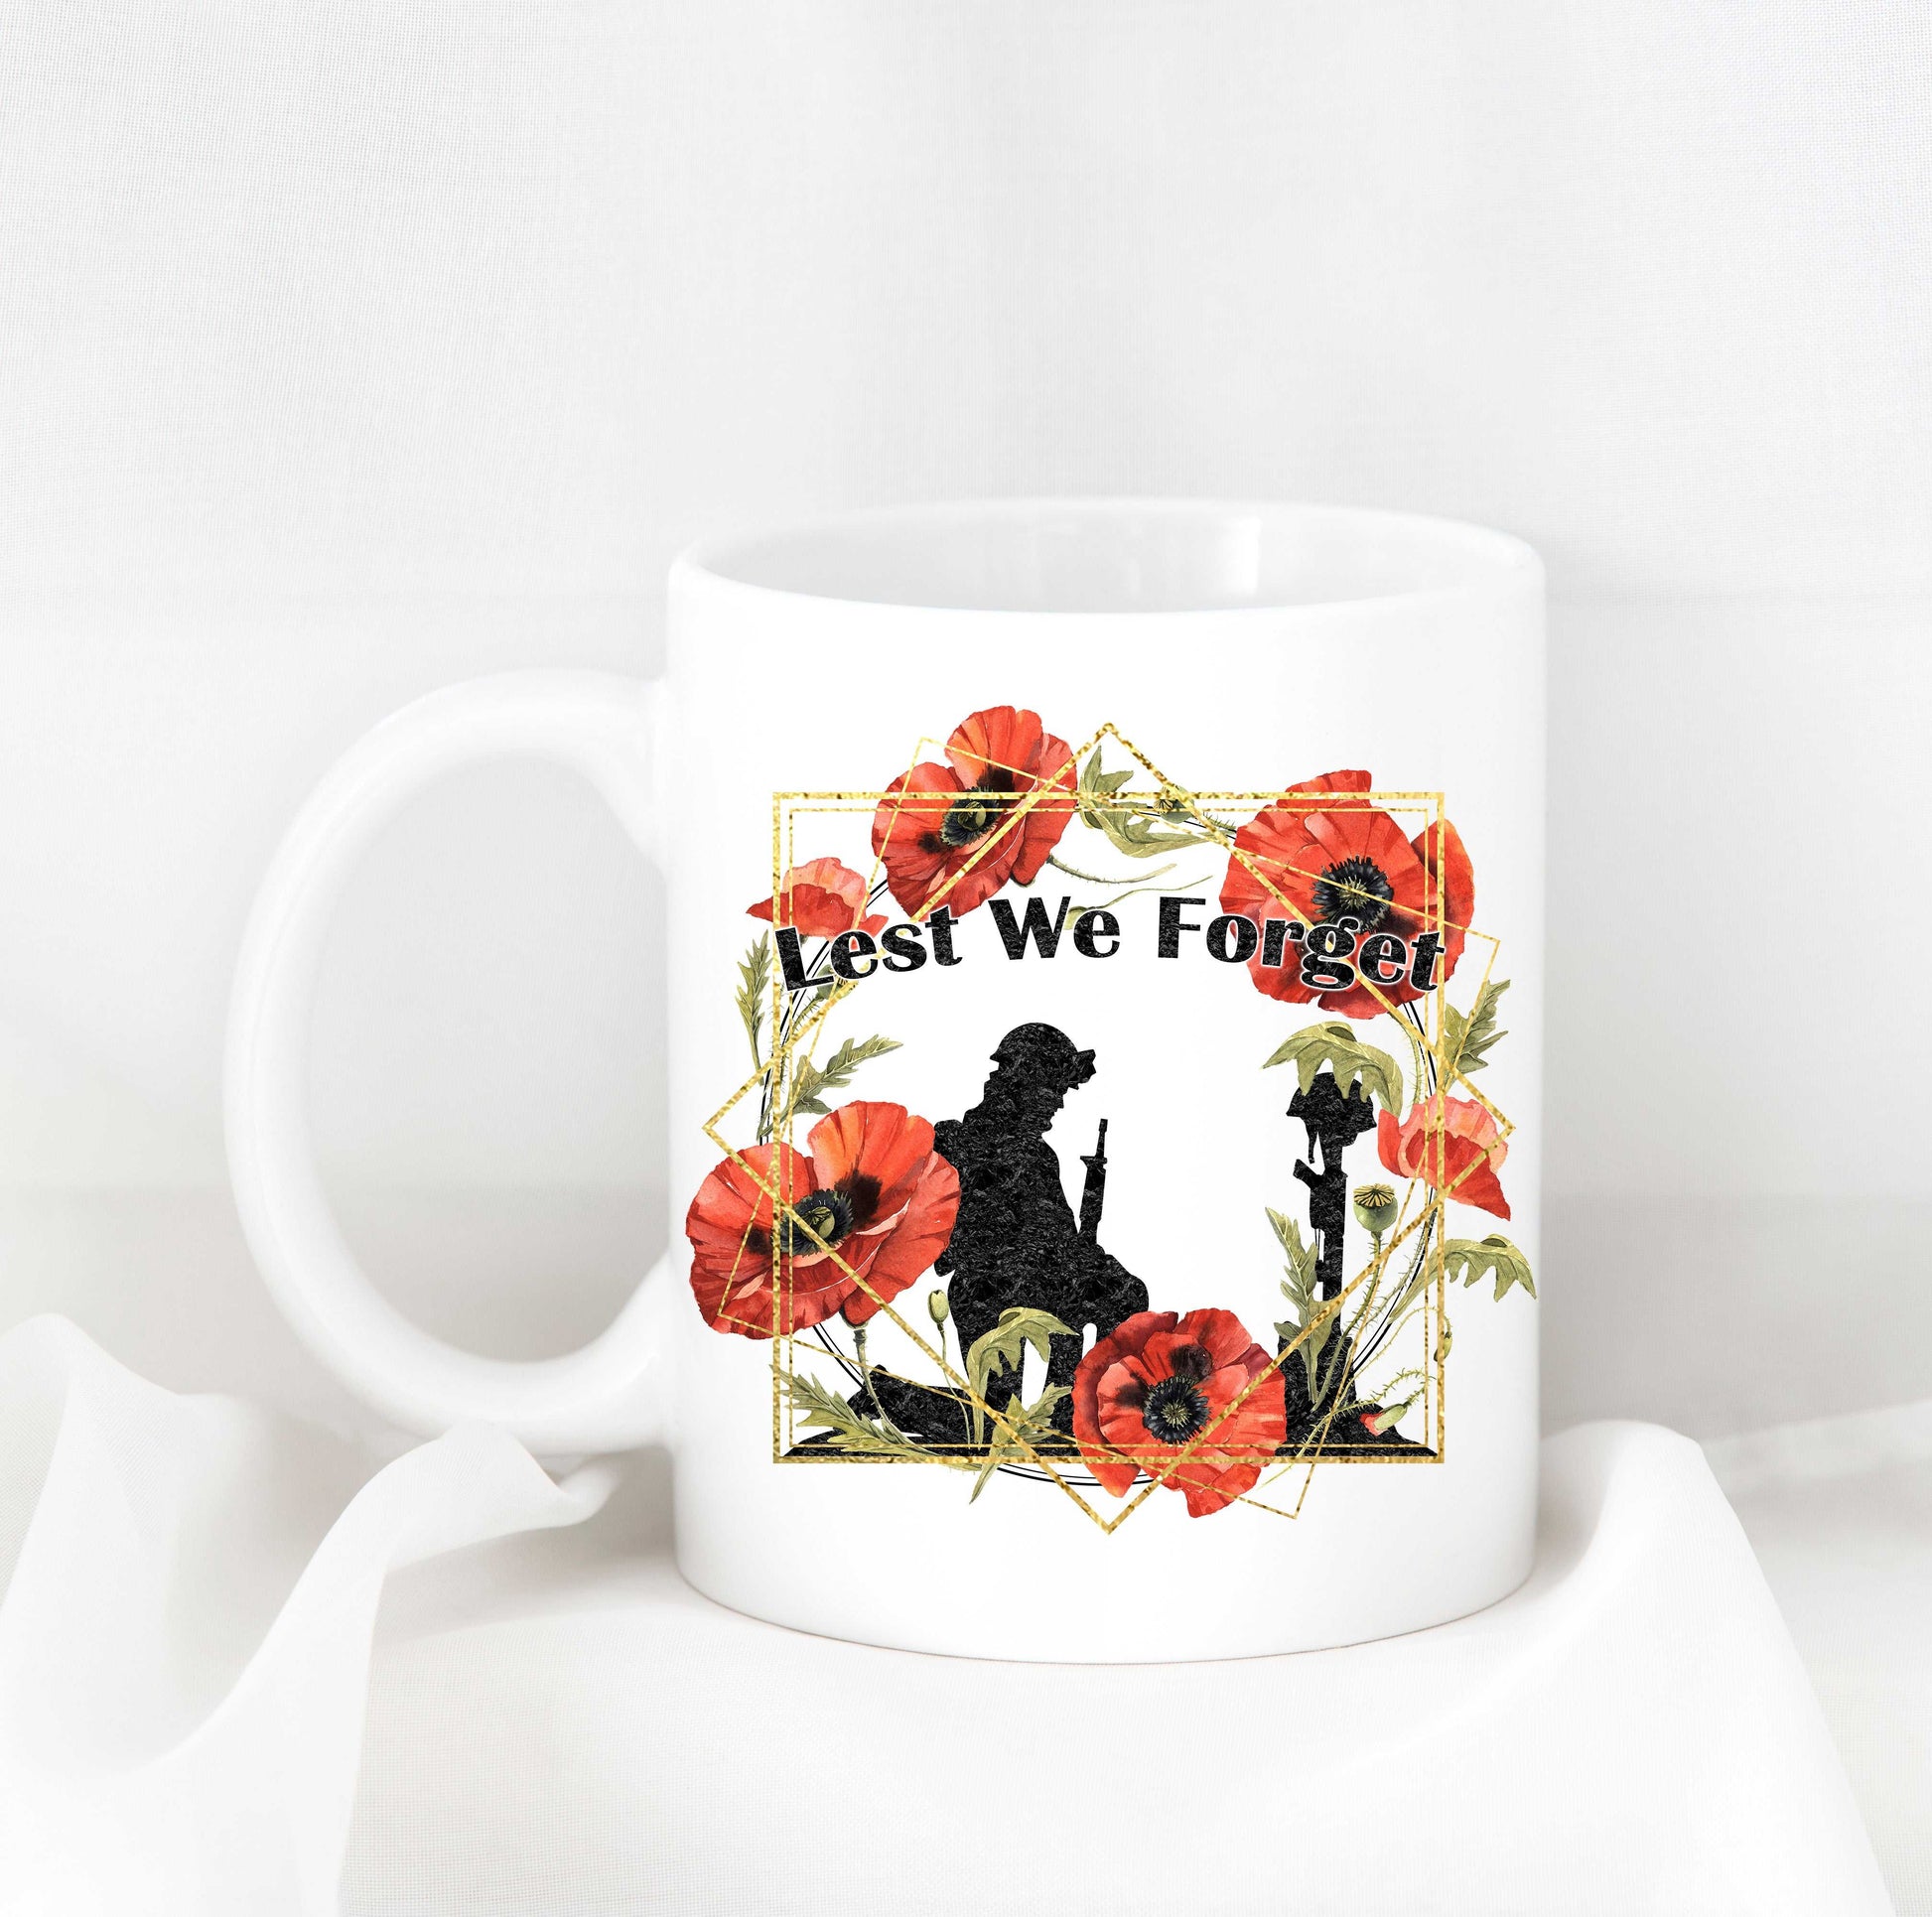  Lest We Forget Remembrance Day Mug by Free Spirit Accessories sold by Free Spirit Accessories